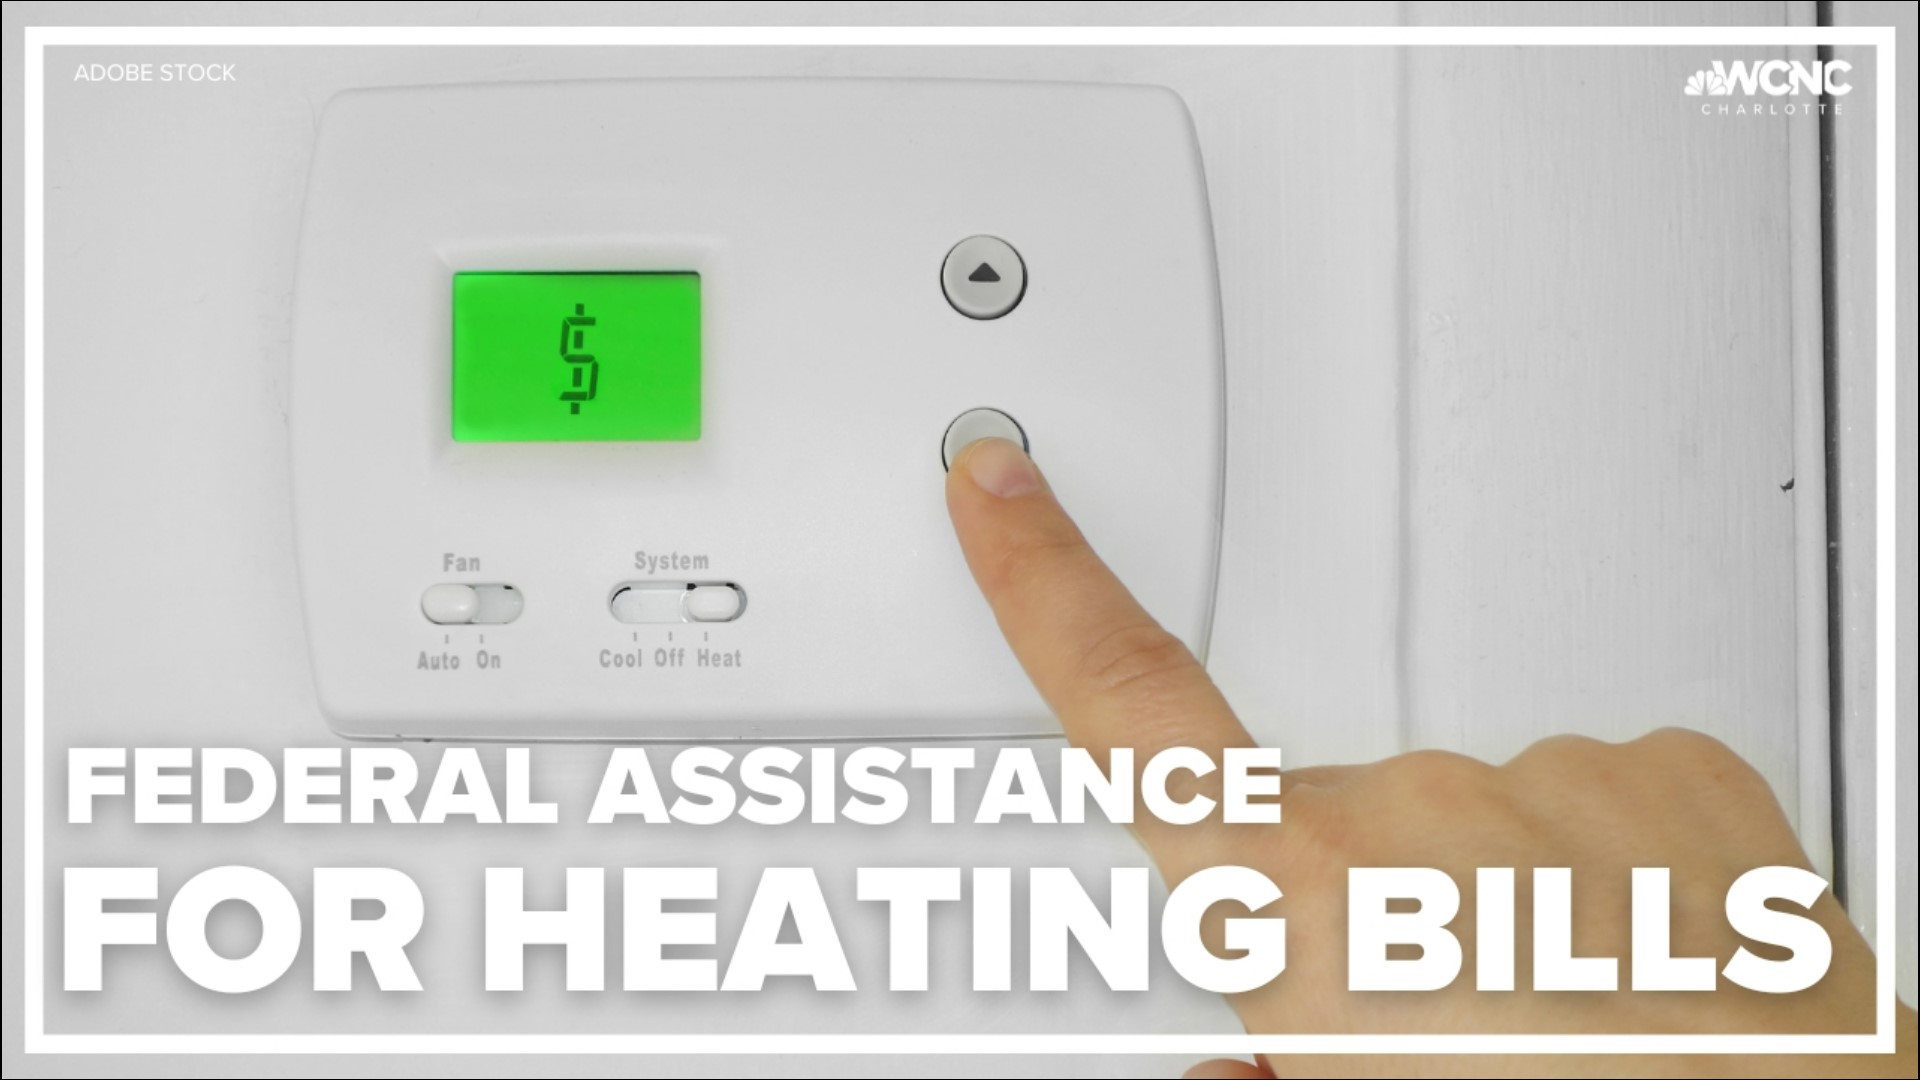 If you need help heating your house, here's what you can tap into.